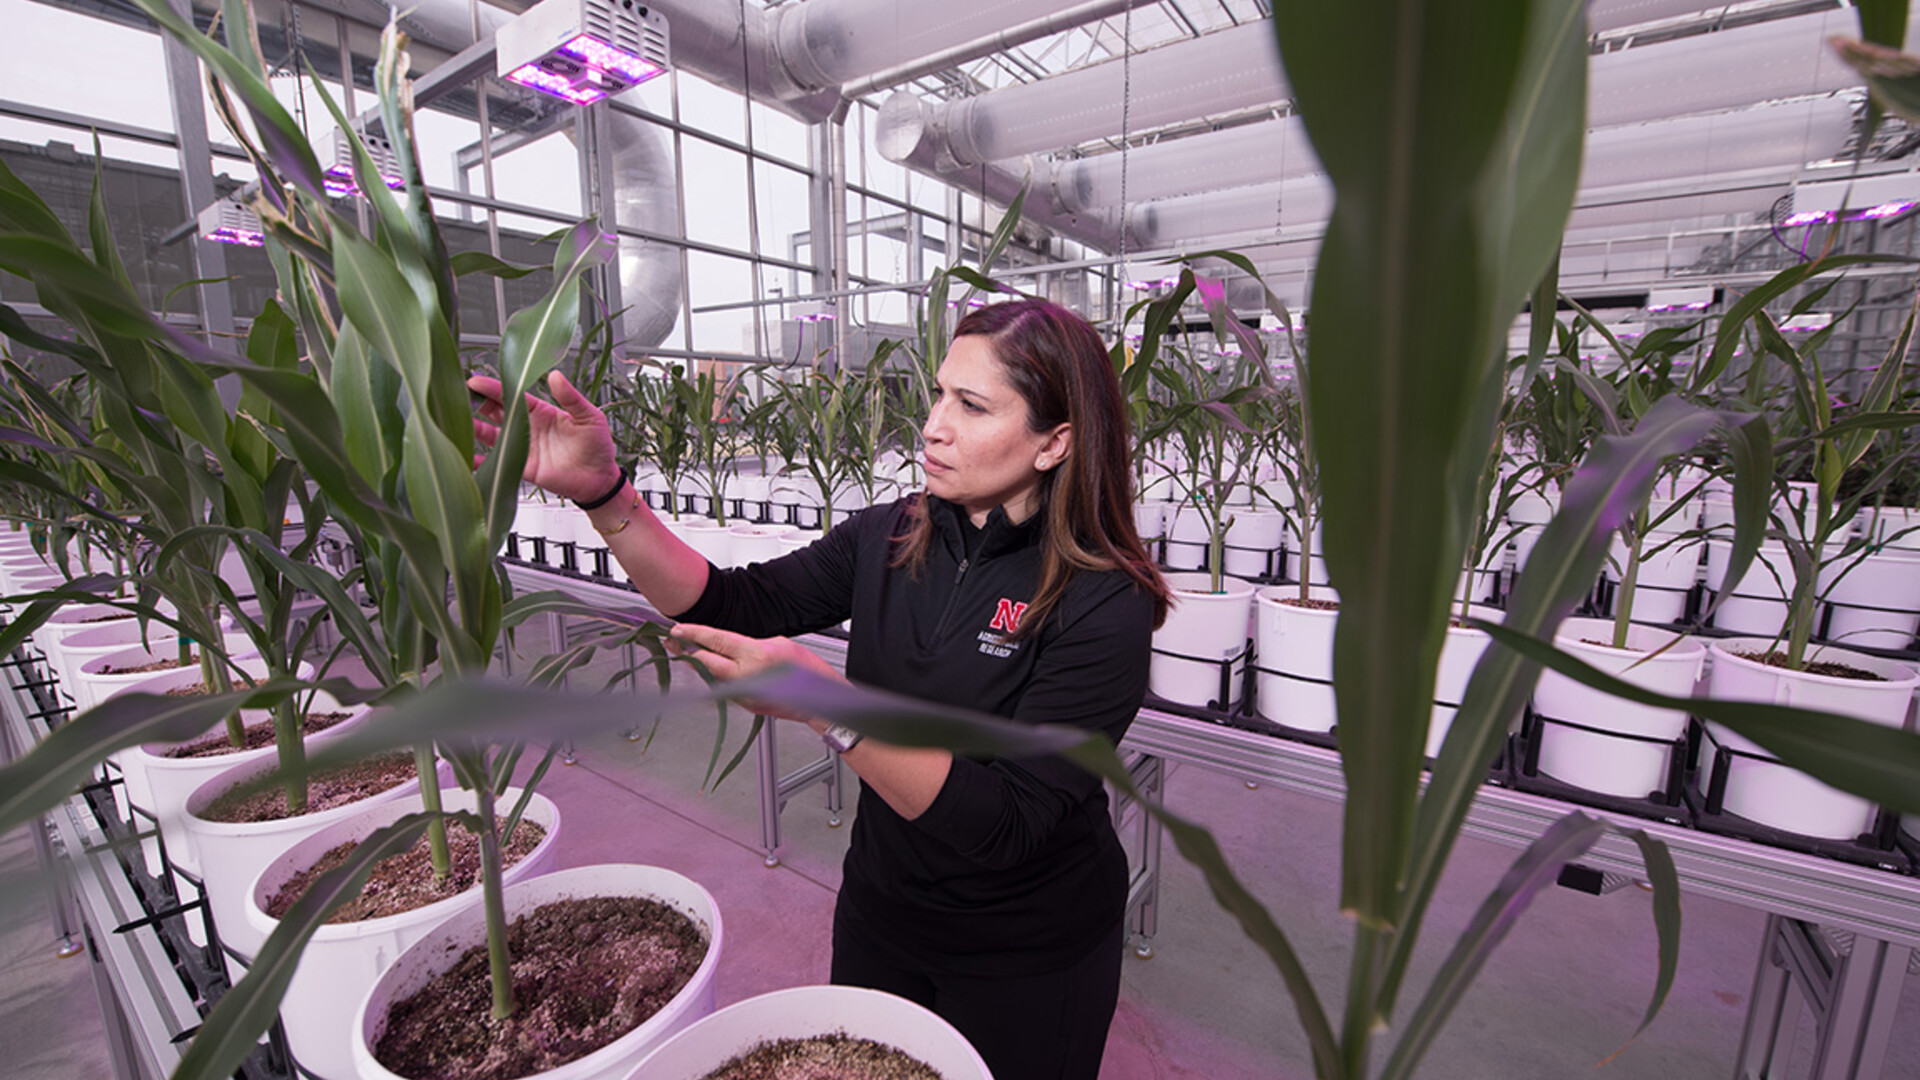 Awada leads development of ag, environment research for national defense